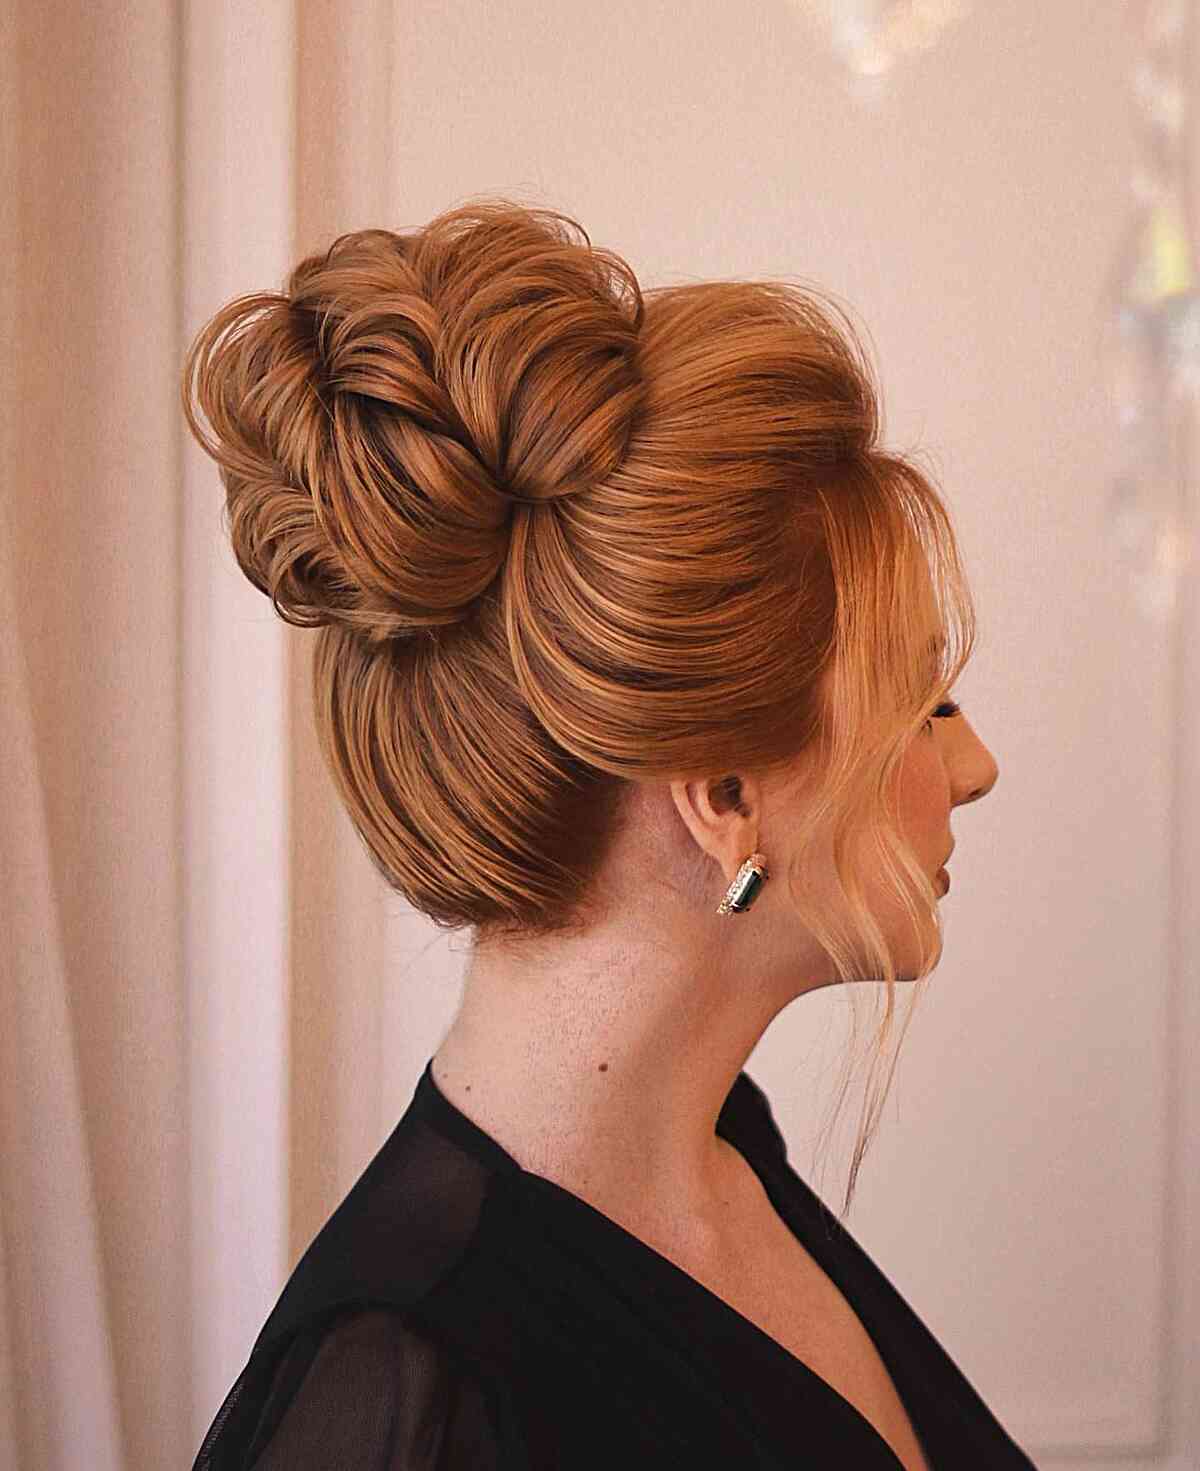 Textured Middle Height Bun Wedding Updo Hairstyle